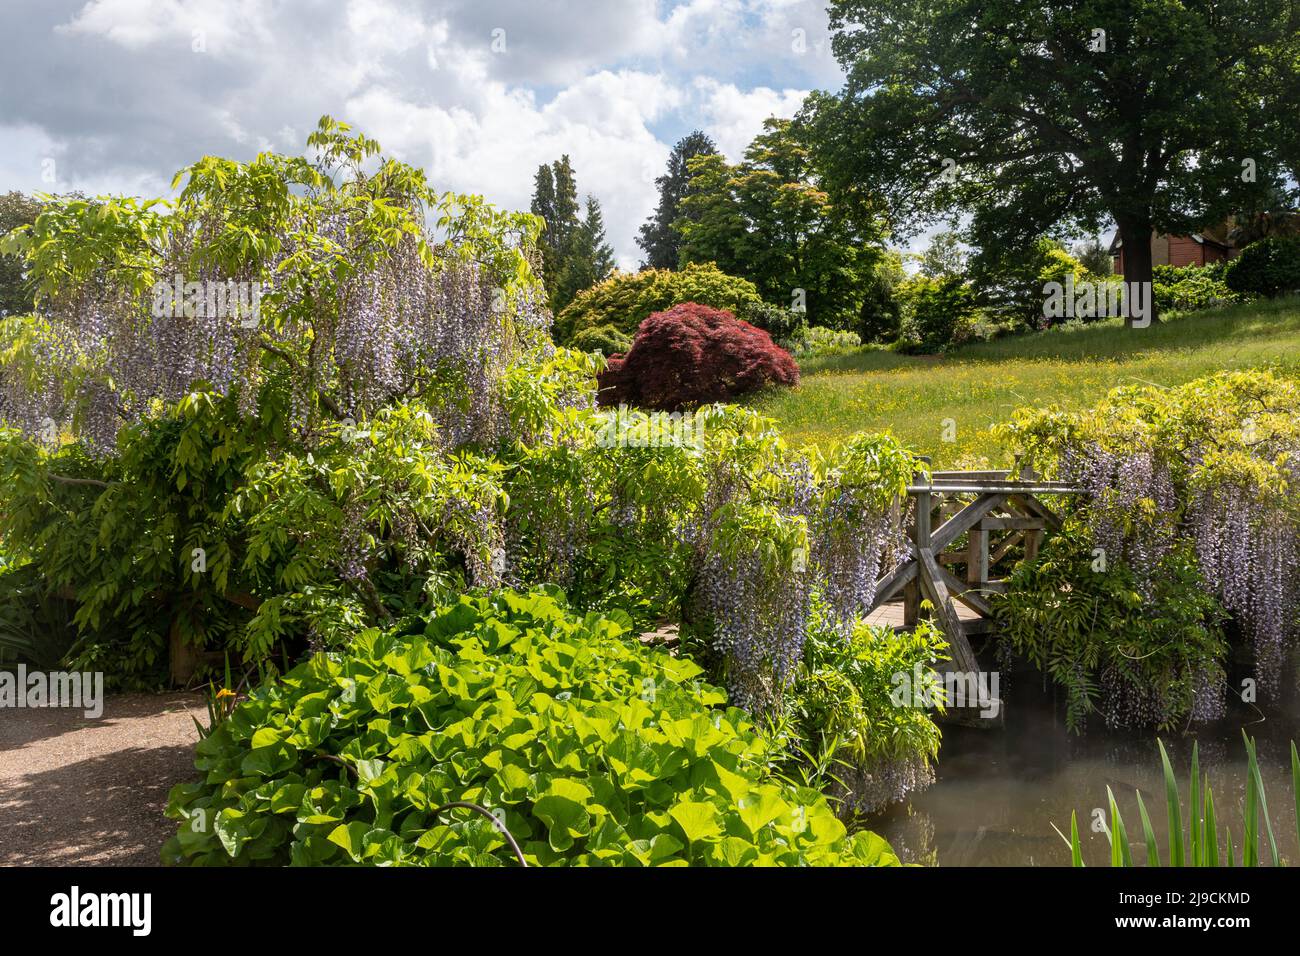 RHS Wisley Garden, view of the Rock Garden during May or late spring, Surrey, England, UK, with wisteria in flower Stock Photo